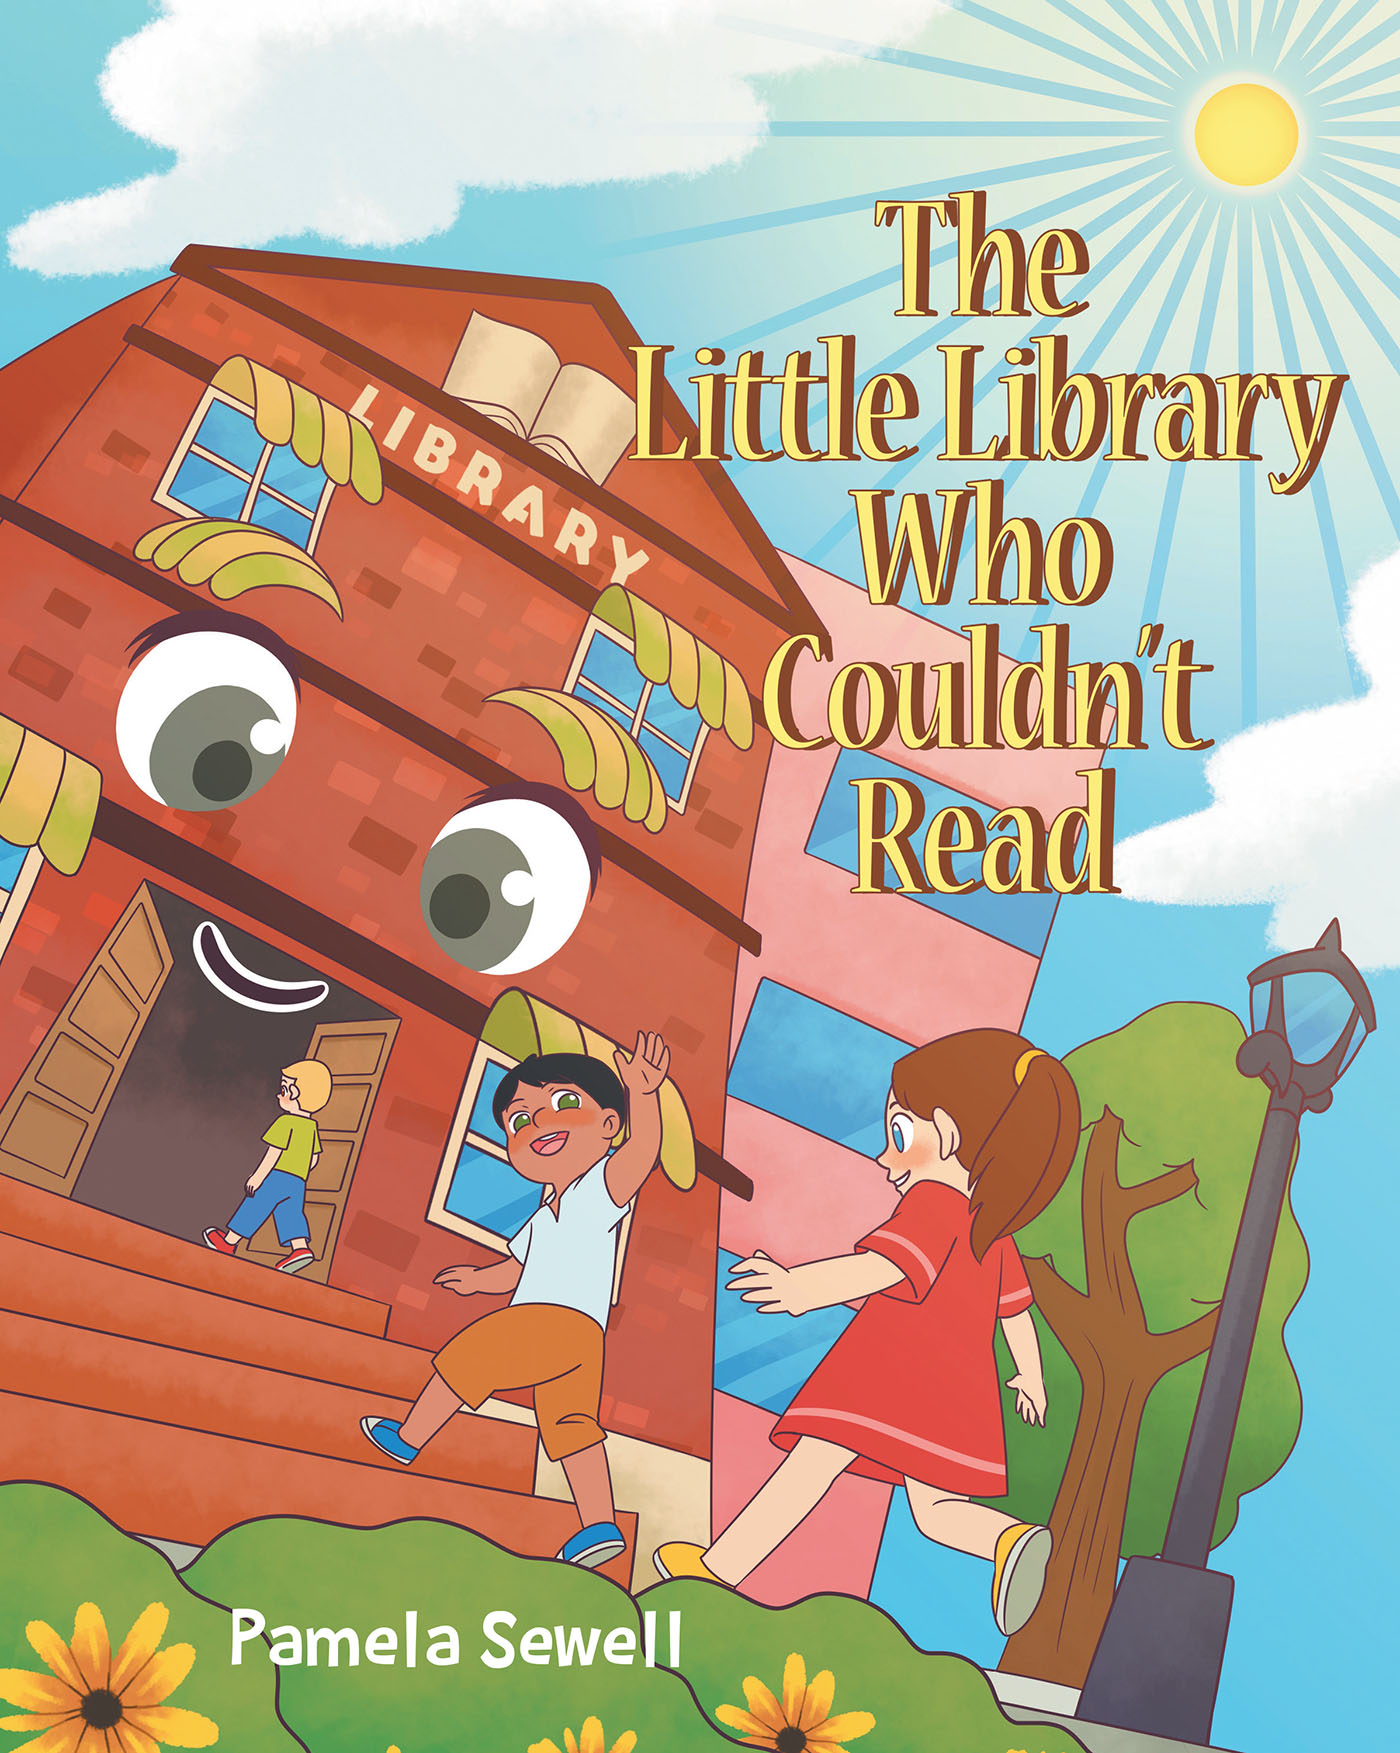 Pamela Sewell’s Newly Released "the Little Library Who Couldn’t Read" is a Darling Story of Friendship and the Wonder of Reading